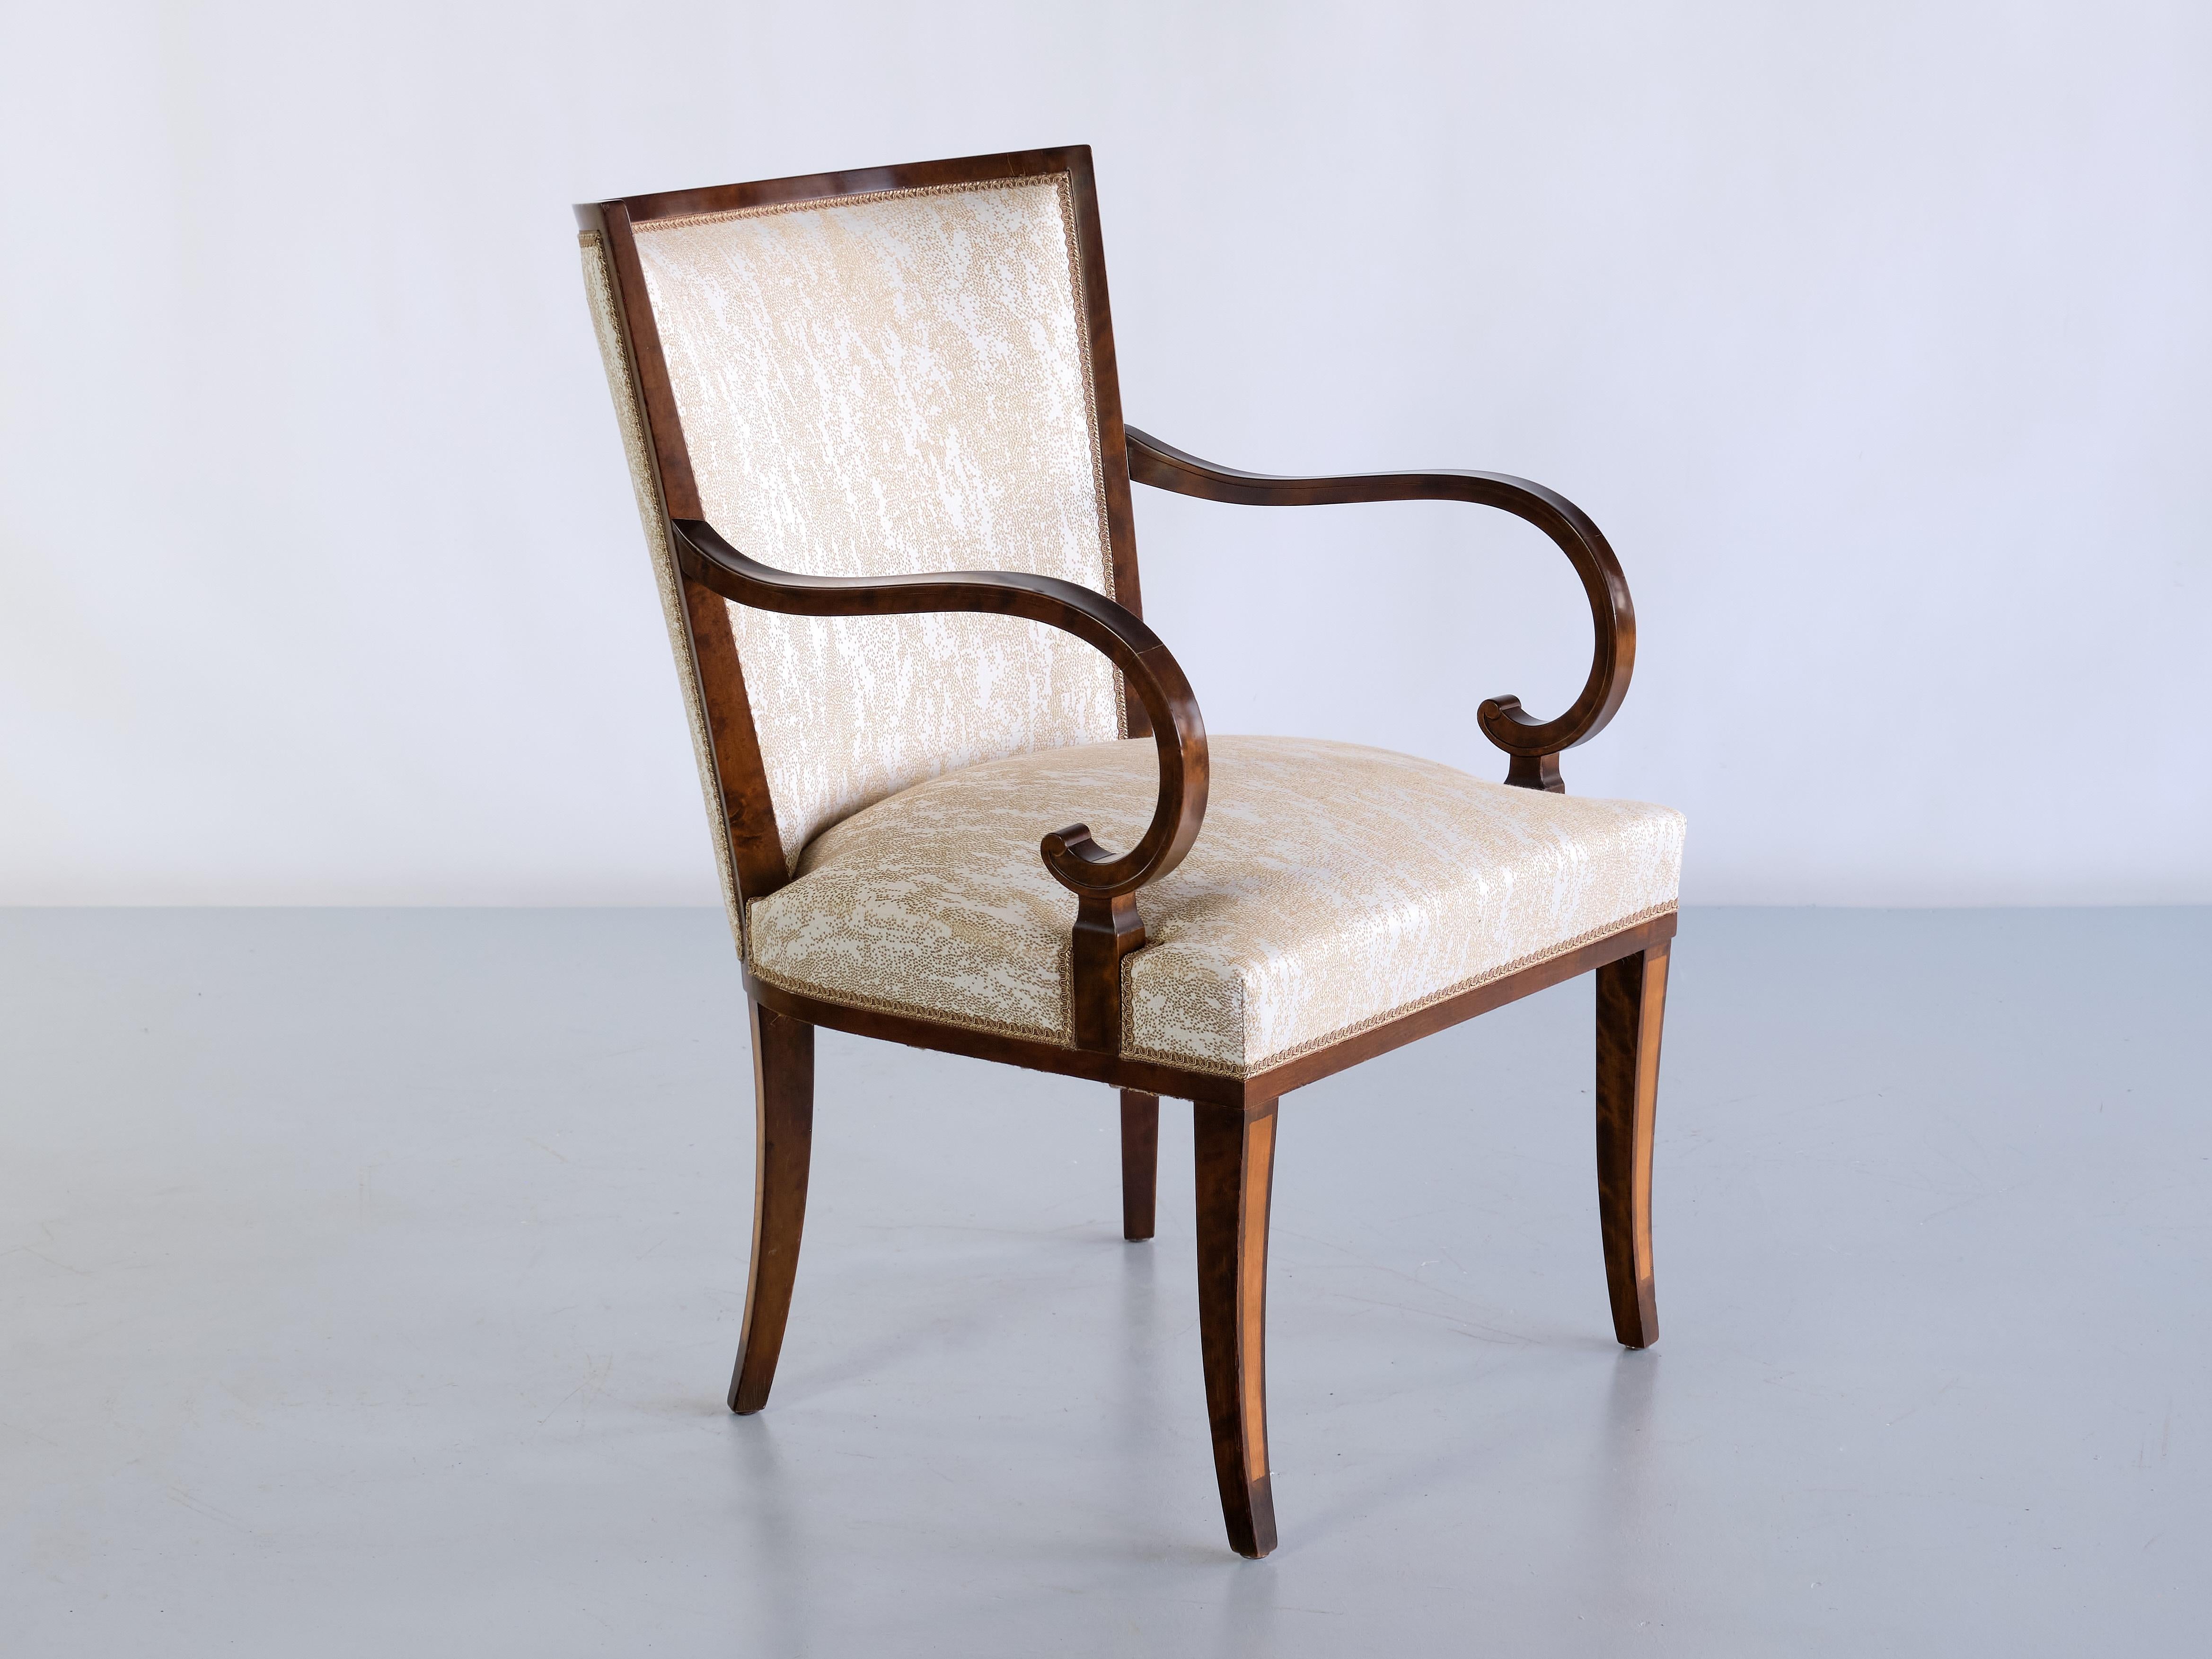 Upholstery Pair of Carl Malmsten Armchairs in Birch and Satinwood, Bodafors, Sweden, 1930s For Sale